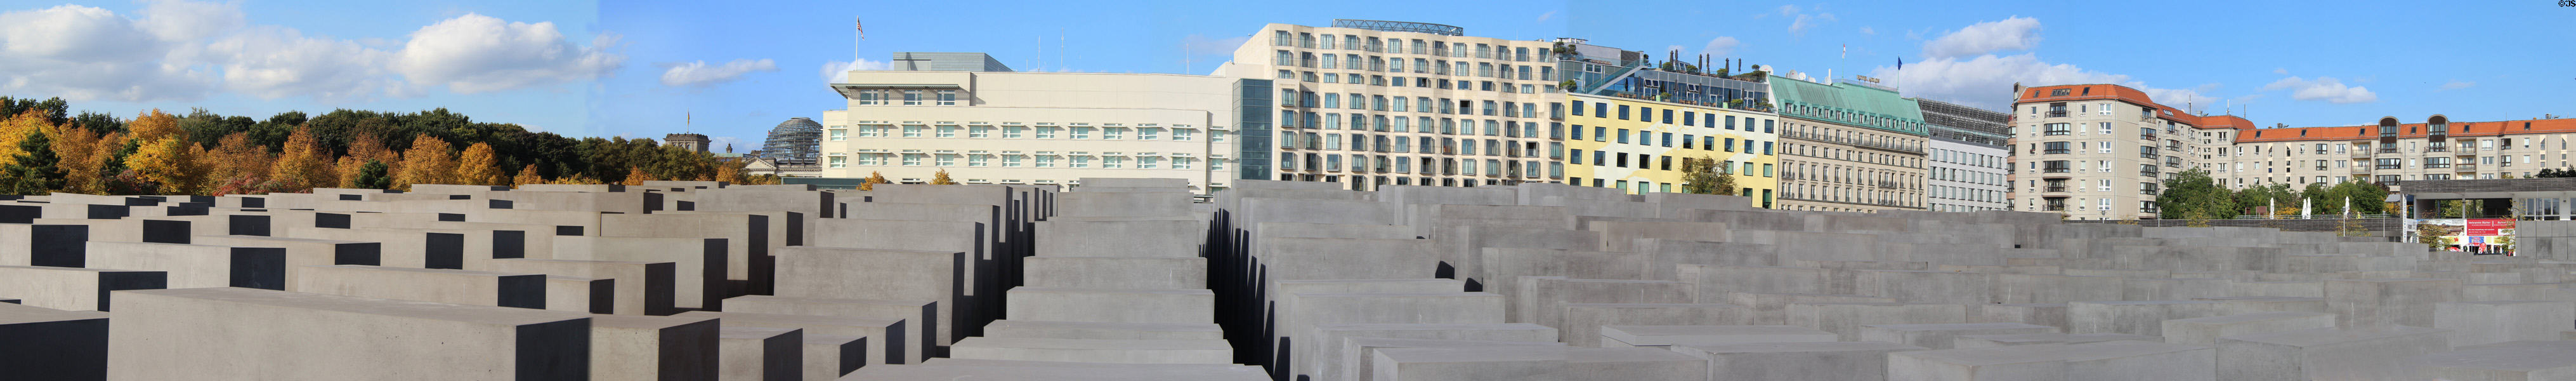 Panorama of Monument to Murdered Jews of Europe. Berlin, Germany.